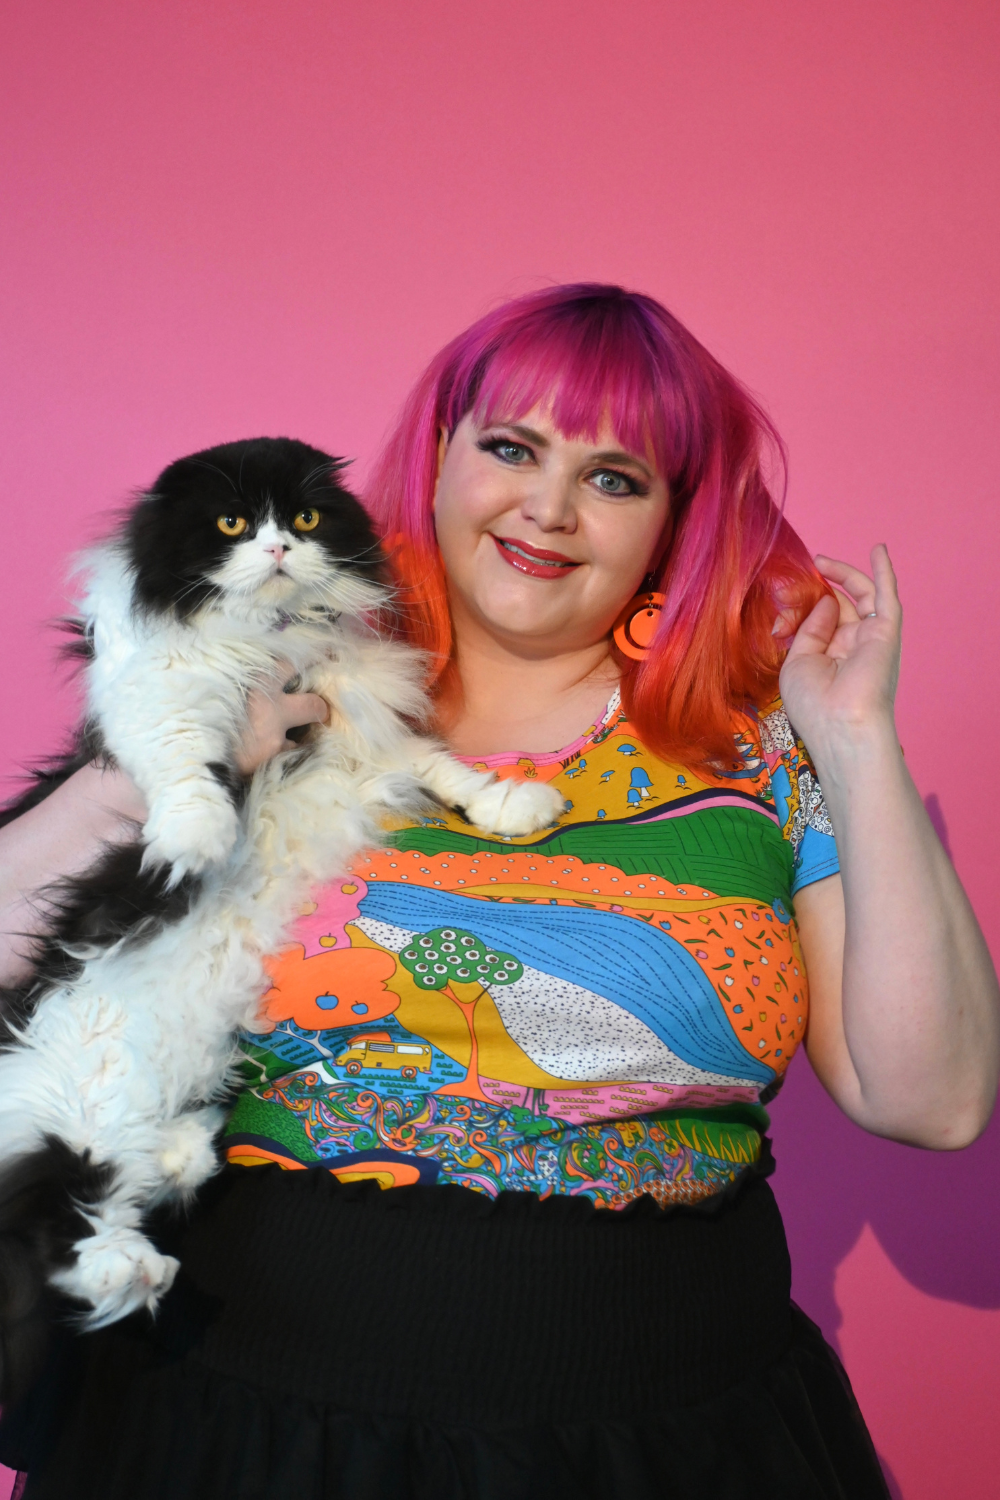 Pink haired model holding cat wearing shirt with landscape graphic in multicolor